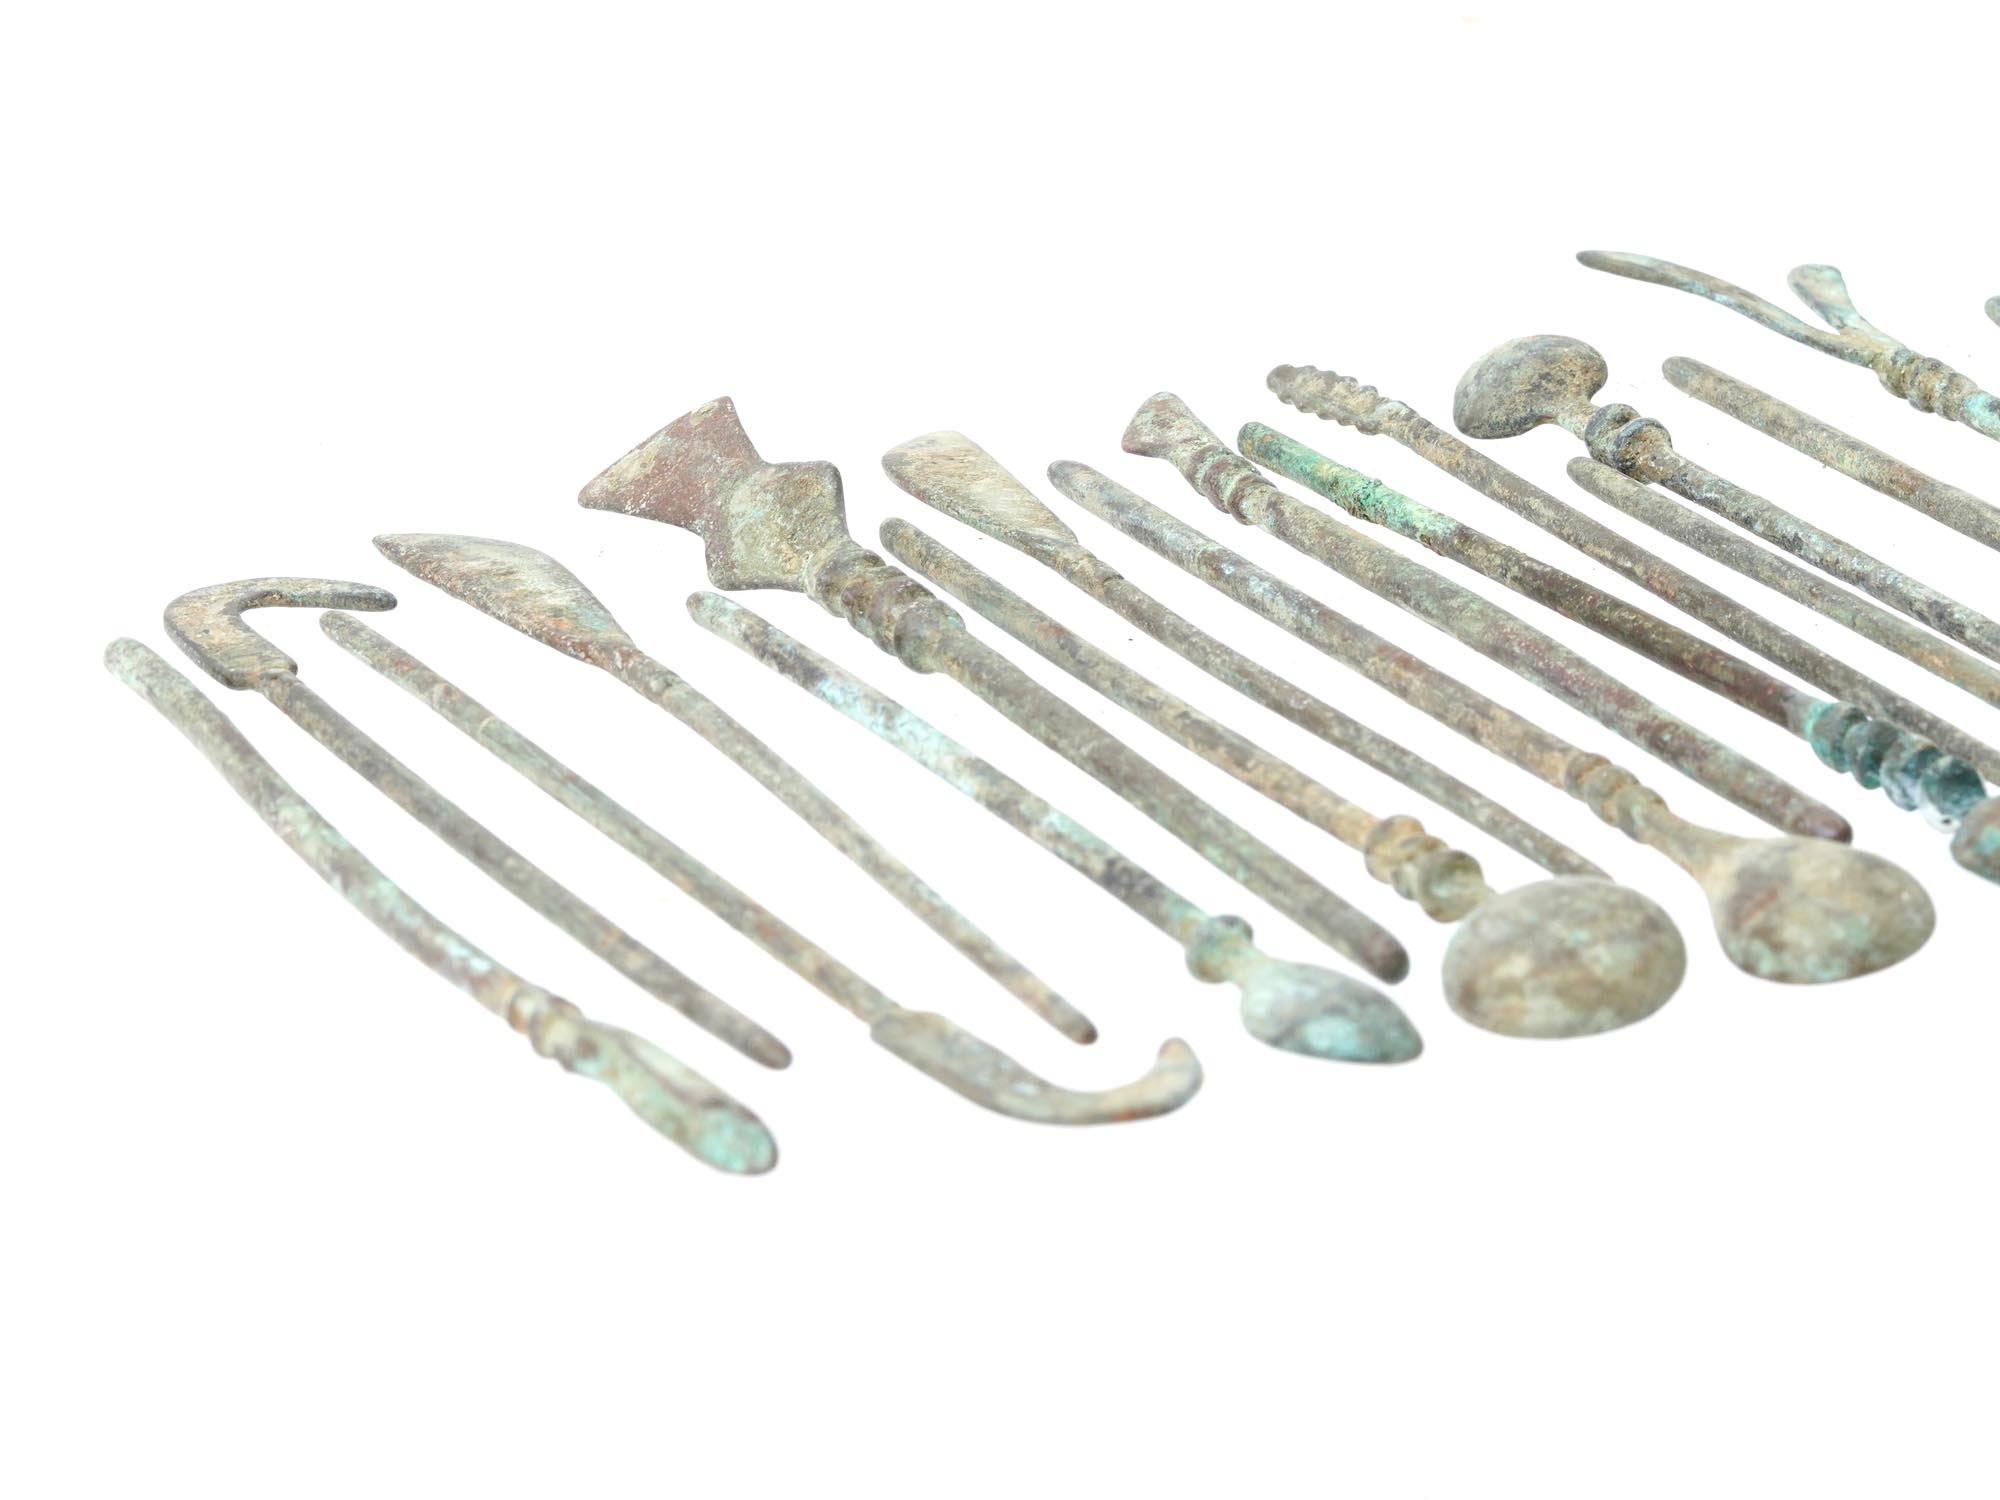 ANCIENT ROMAN MEDICAL TOOLS FOR SURGICAL PROCEDURES PIC-3